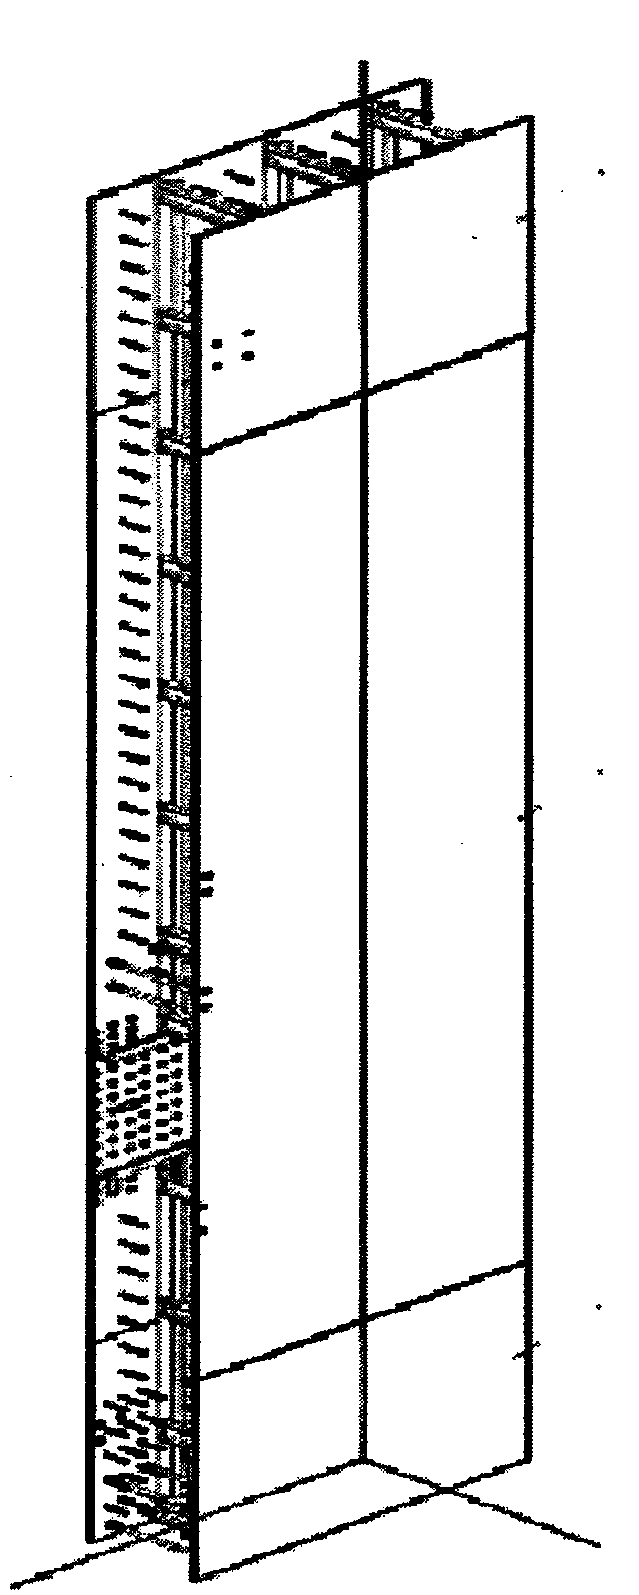 Vertical assembling method for structural modules of nuclear power plant